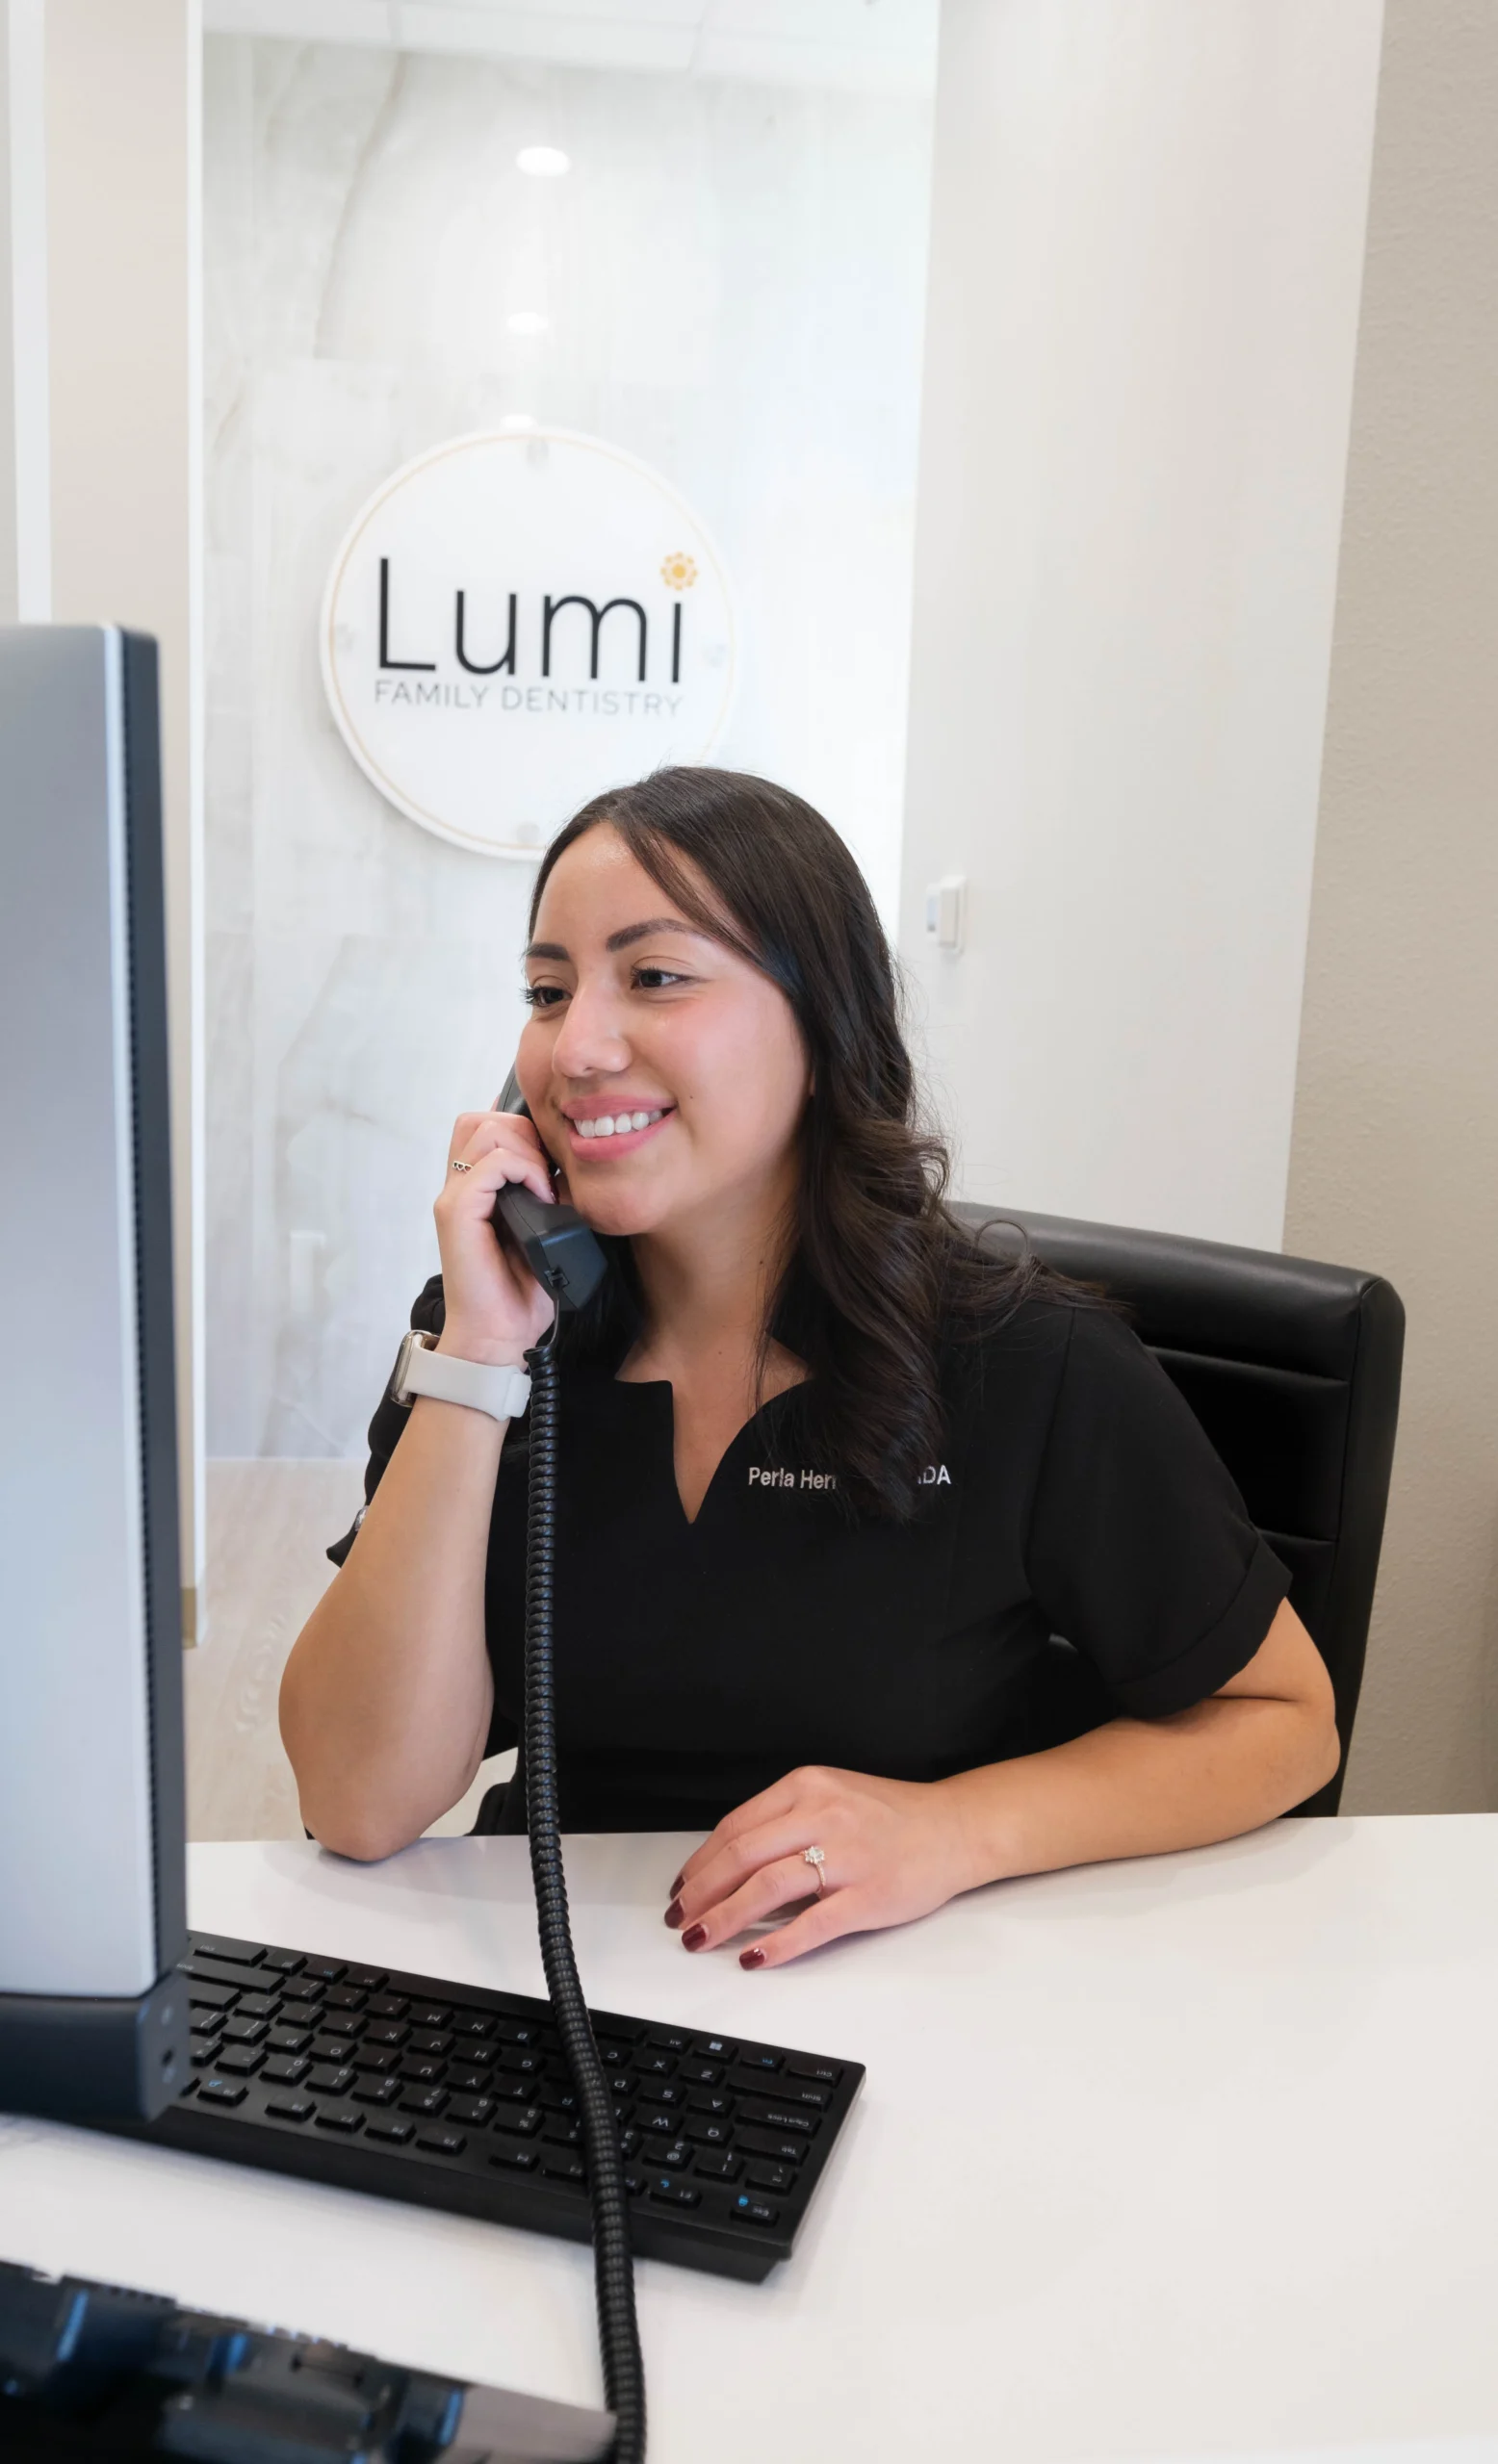 Lumi Dentistry assistant answering phone